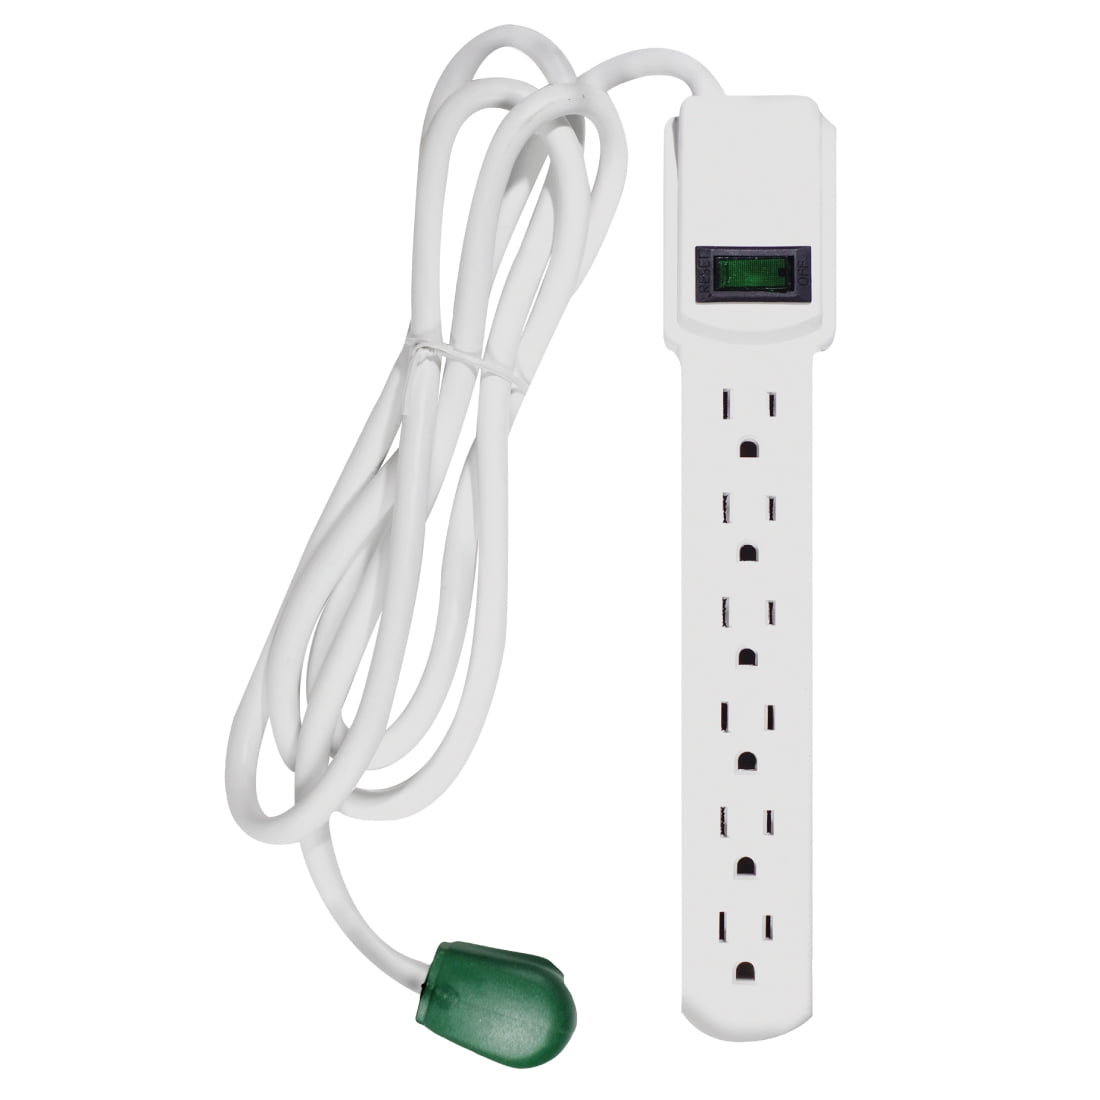 Details about   Power By Go Green 6 Outlet Surge Protector w/ 15 ft Heavy Duty Cord GG-16315-15 